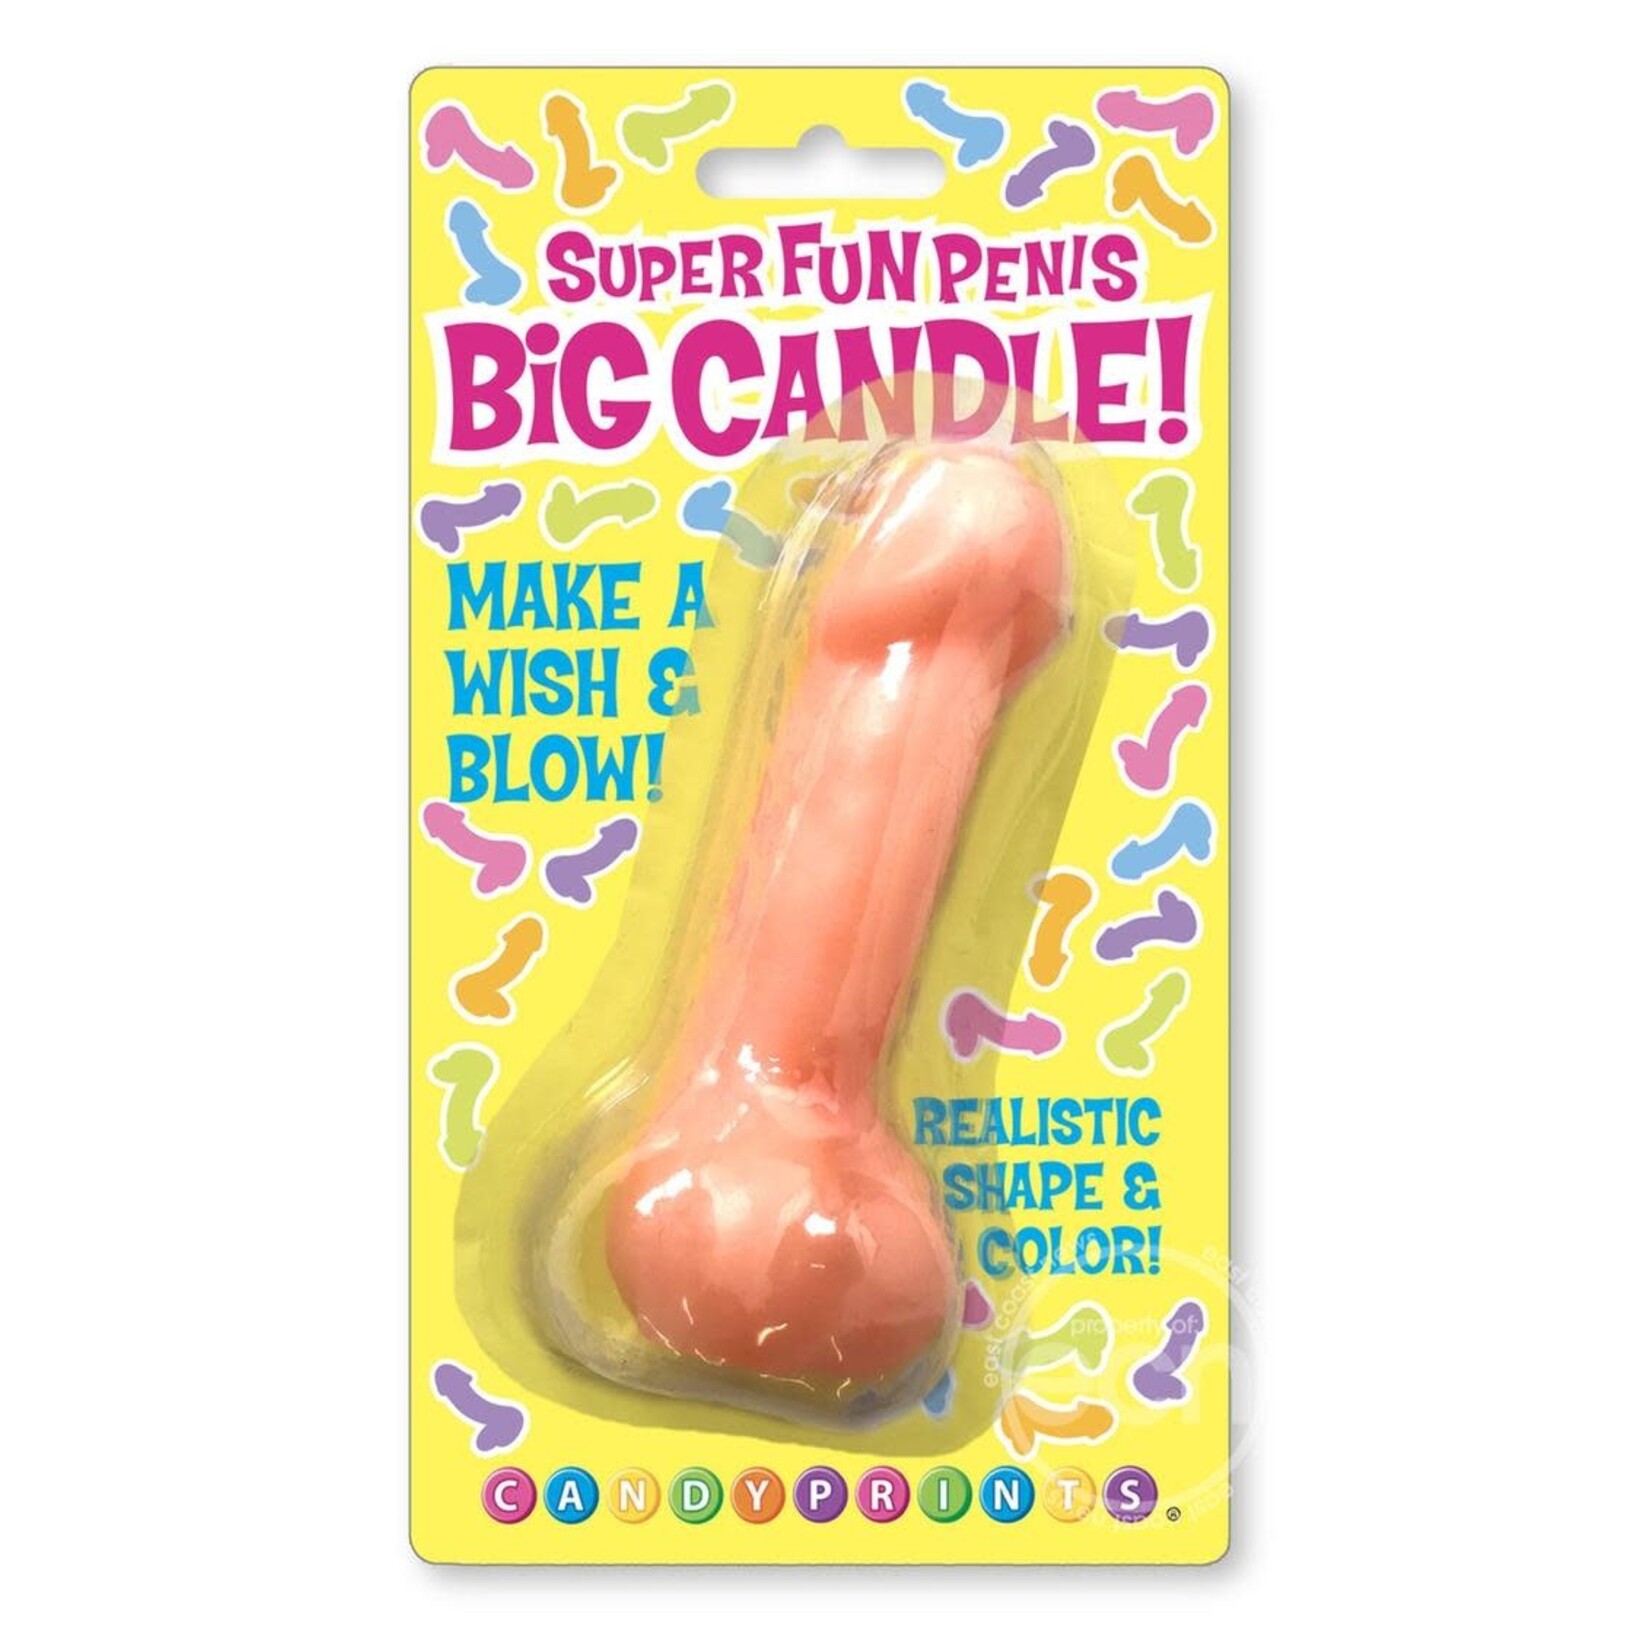 Little Genie Productions Candy Prints Super Fun Penis Big Candle Pink